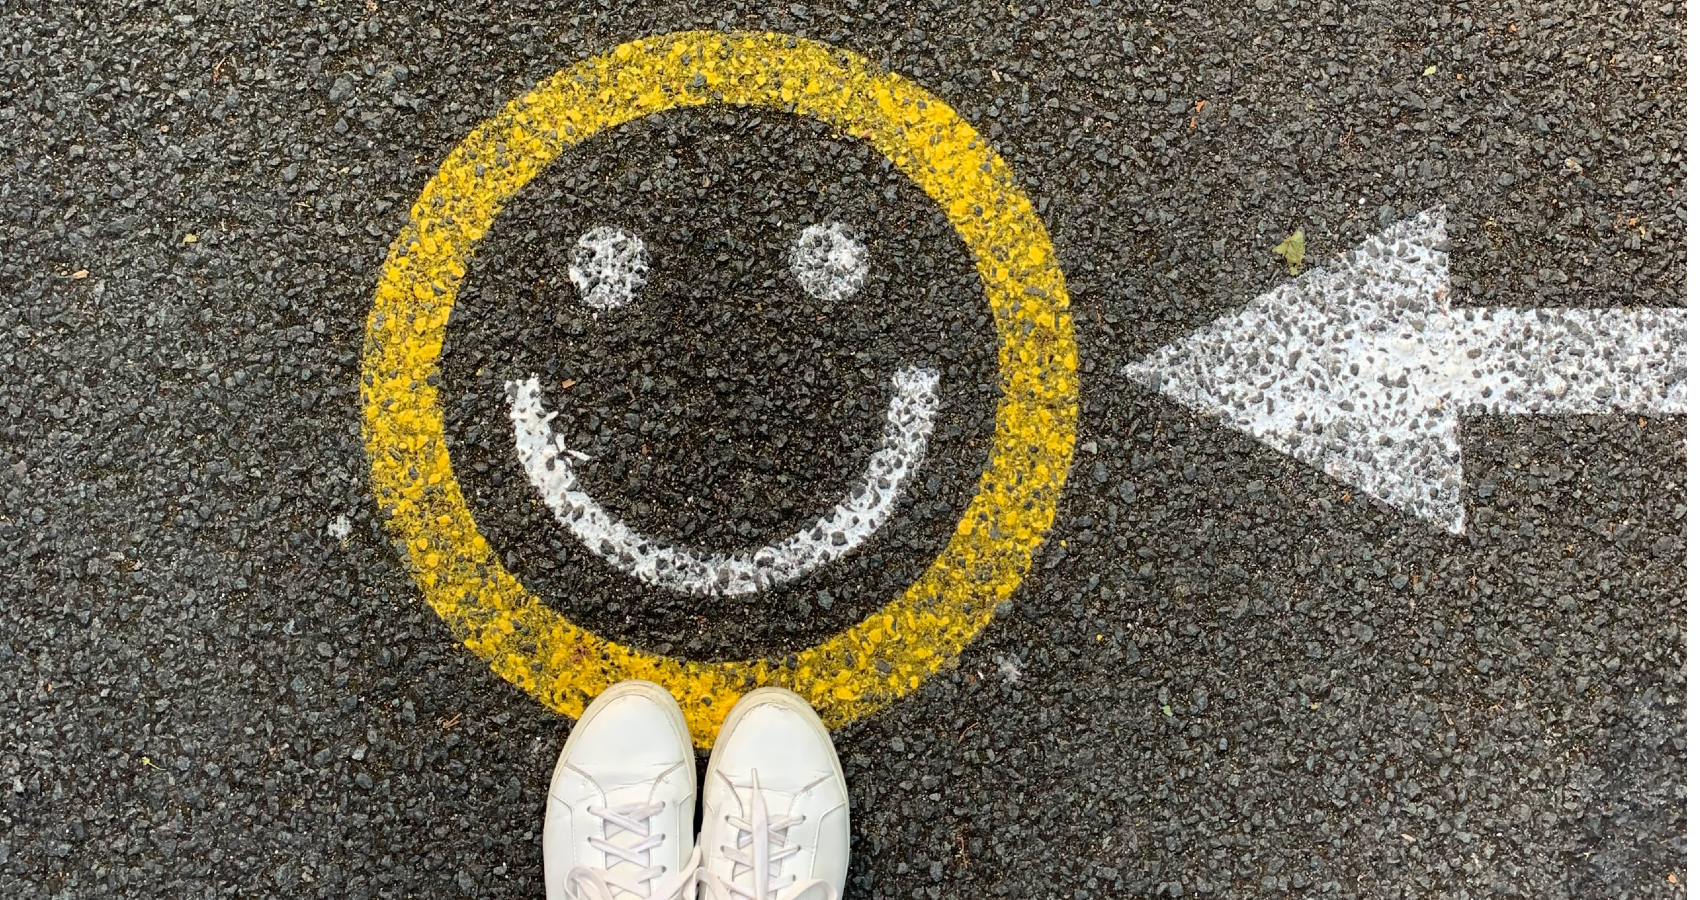 A smiley face painted on the road